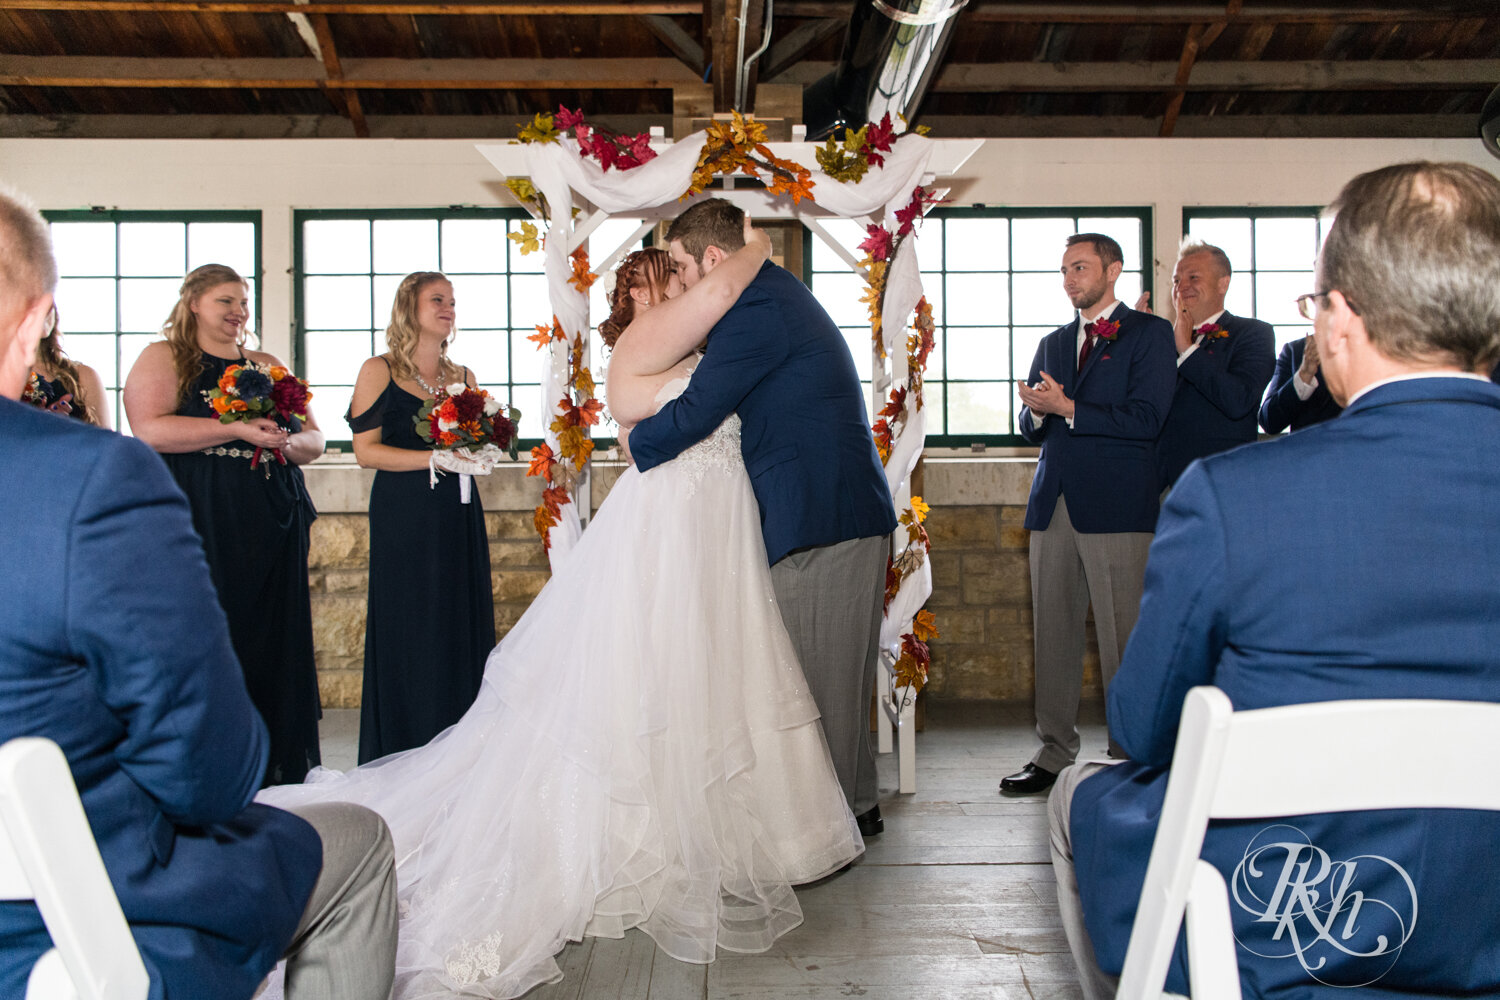 Plus size bride and groom kiss at wedding ceremony at Olmsted County Fairgrounds in Rochester, Minnesota.